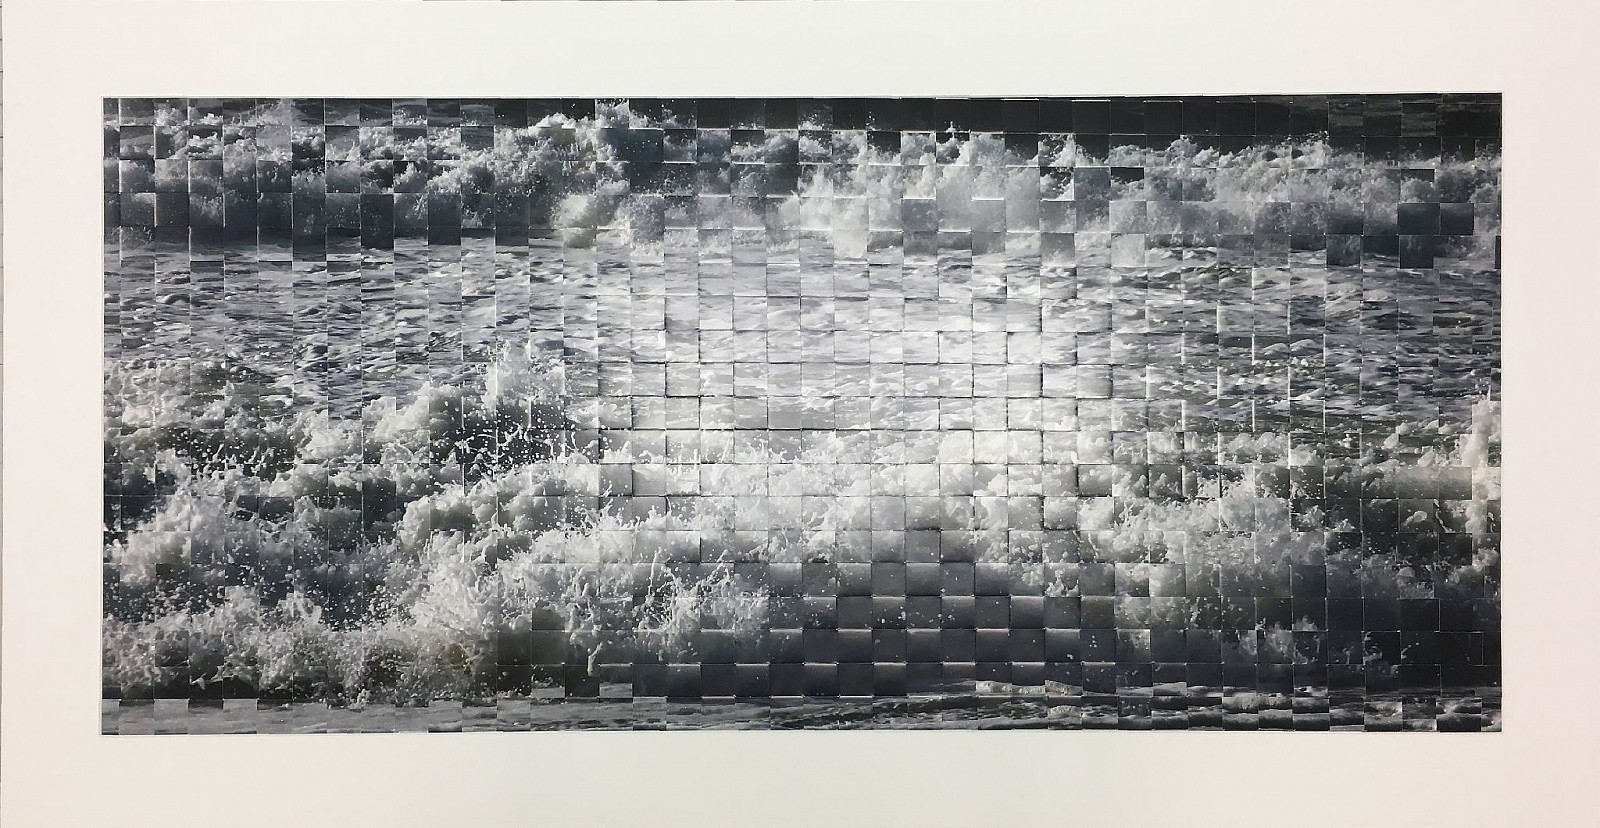 Debranne Cingari (PHOTOGRAPHY), Churning, 2020
Handcrafted Weave Canson Archival Photograph, 19 1/2 x 42 in. (49.5 x 106.7 cm)
DC200601